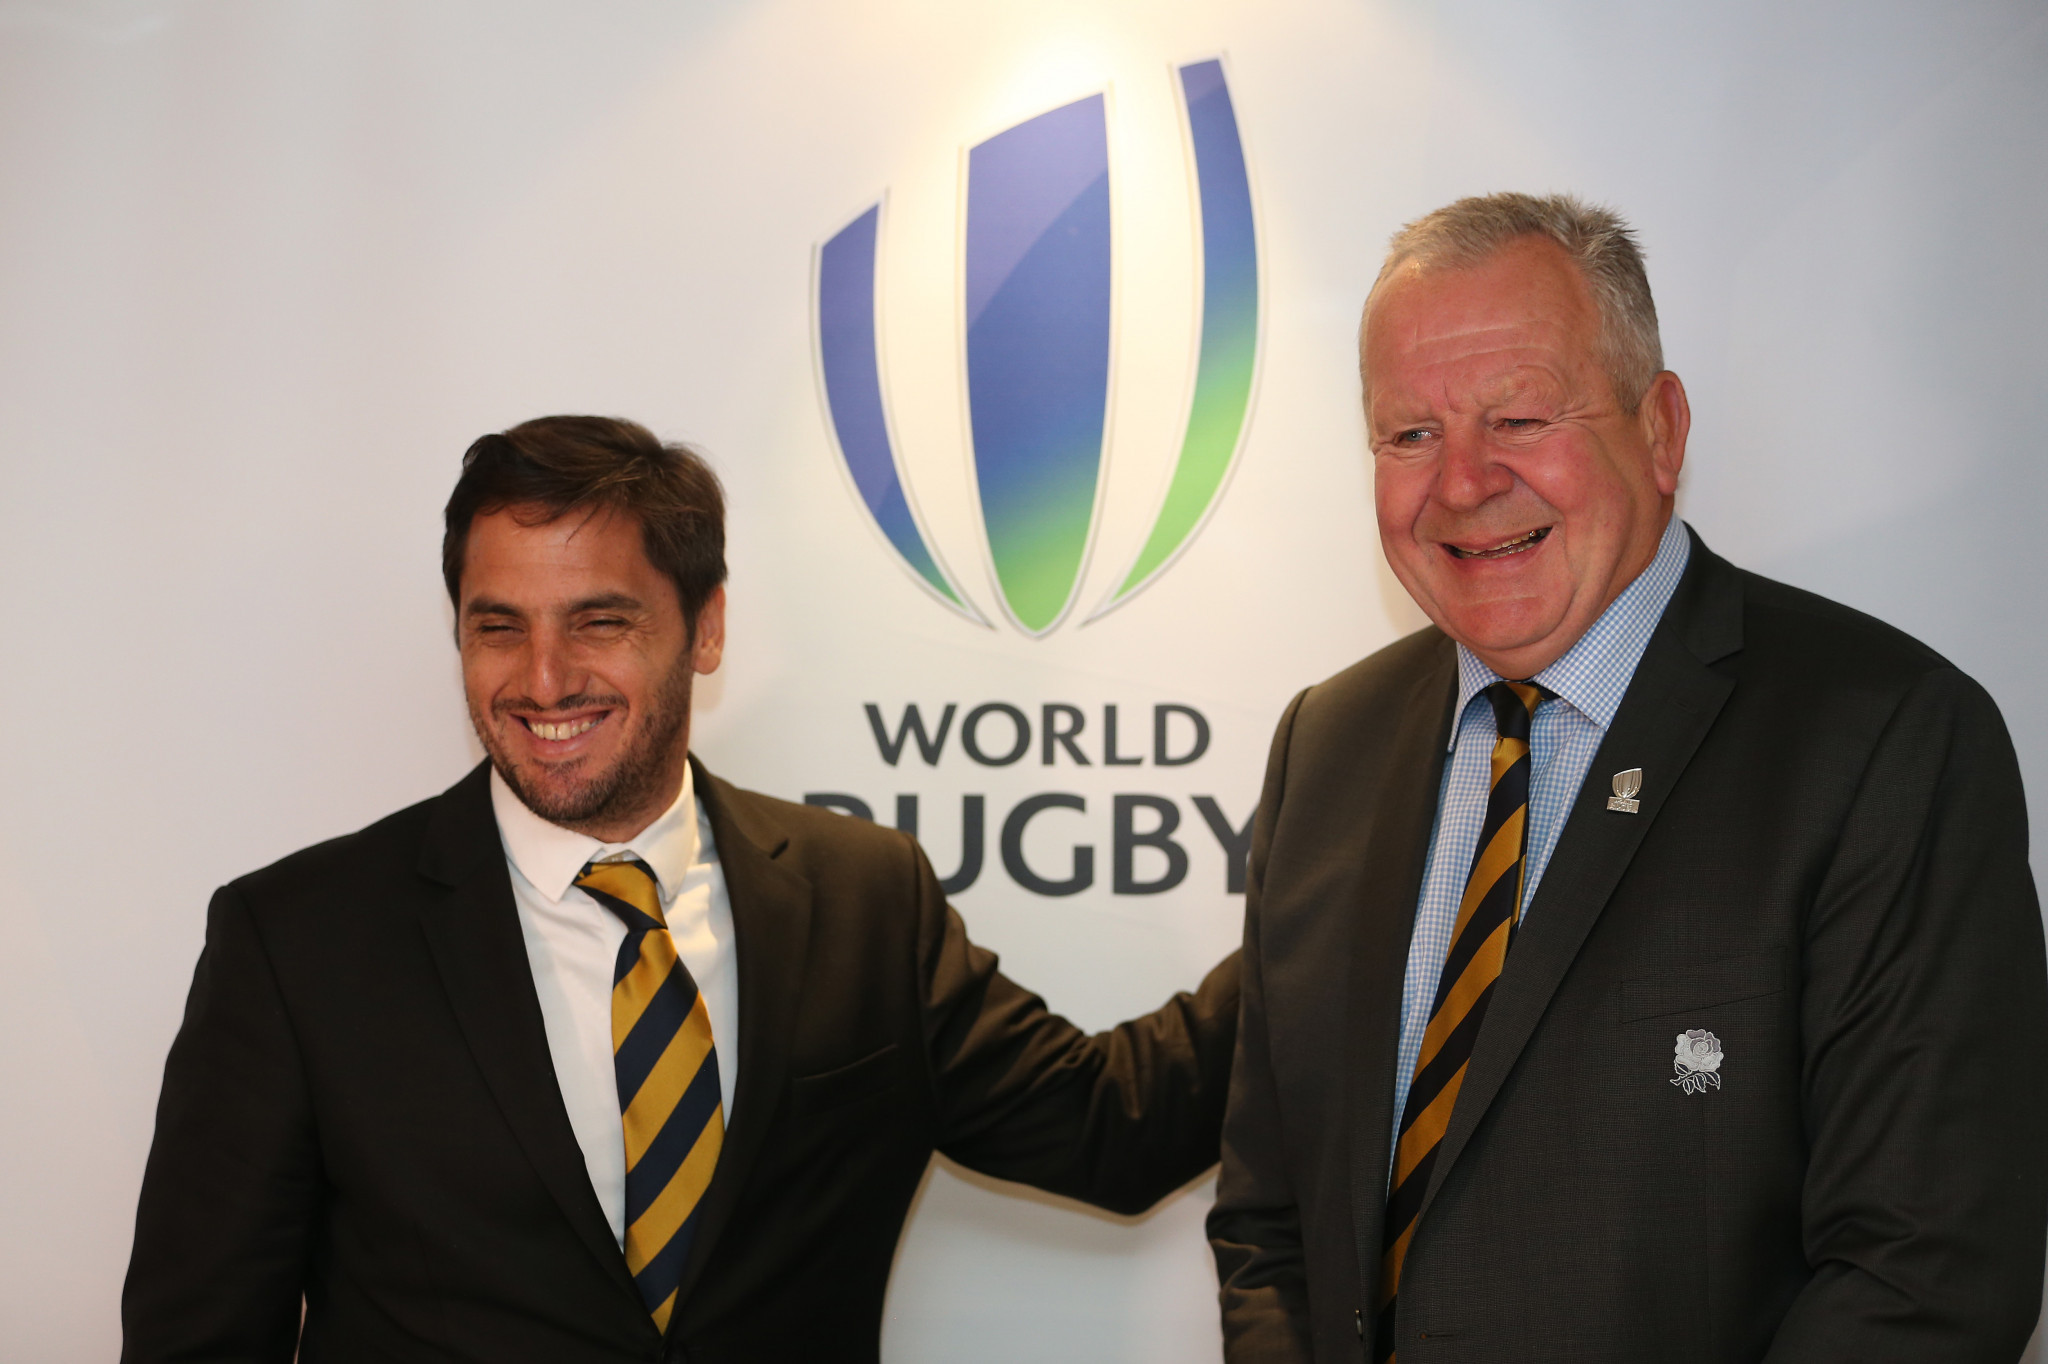 Two of the five RWCL Board members:  Agustin Pichot, vice-chairman of World Rugby and Bill Beaumont, chairman of World Rugby. Now put yourself in the shoes of a World Rugby Council member from a neutral country/region ©Getty Images